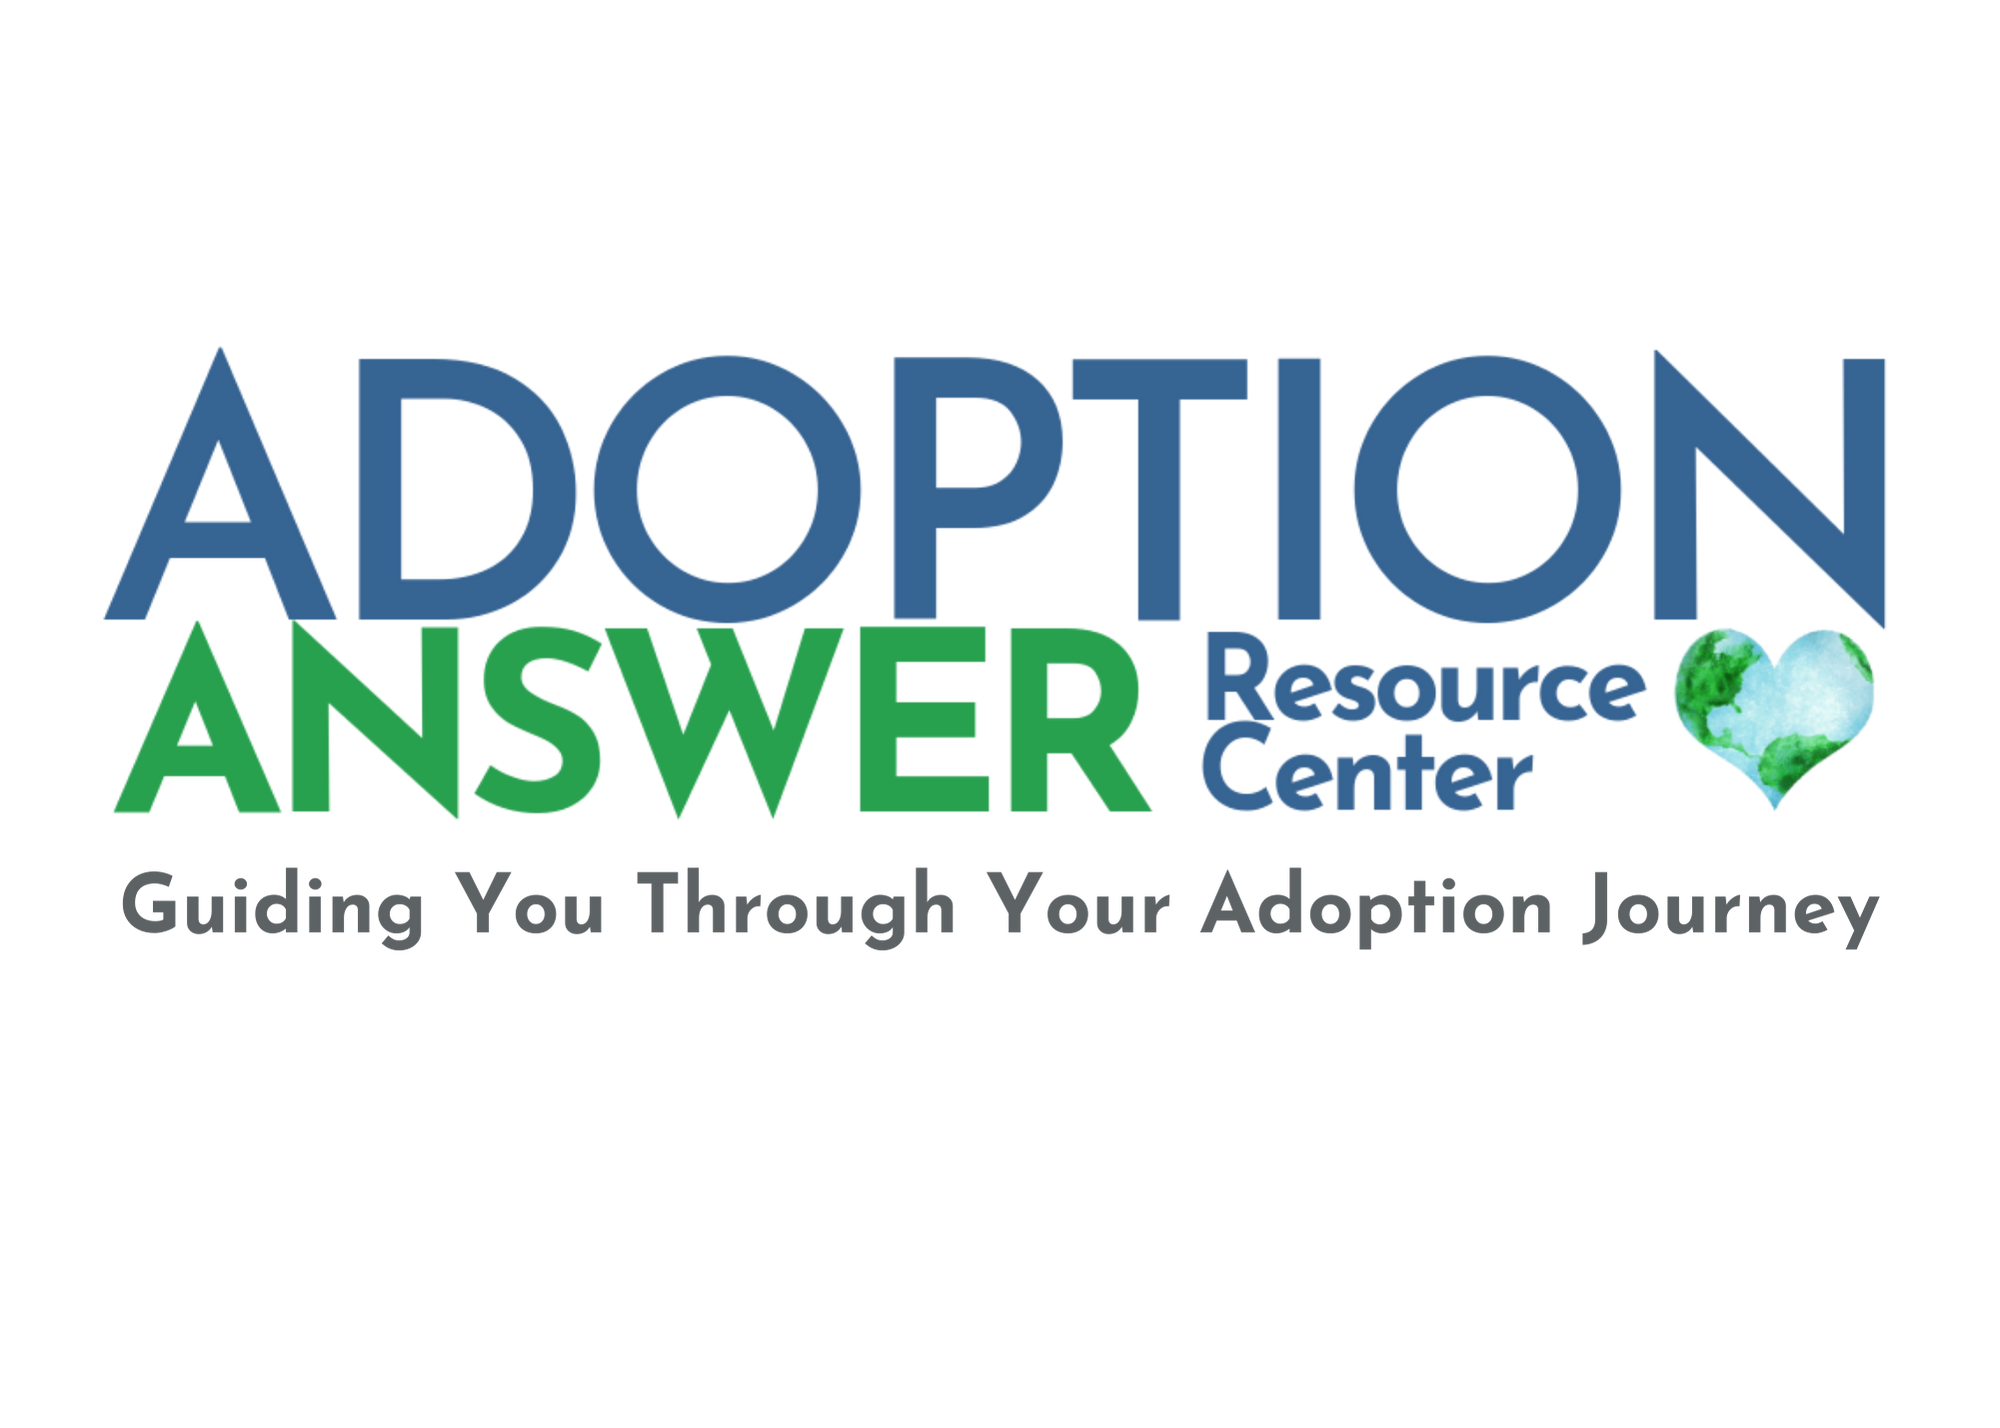 waiting families here to view. Adoption is the answer